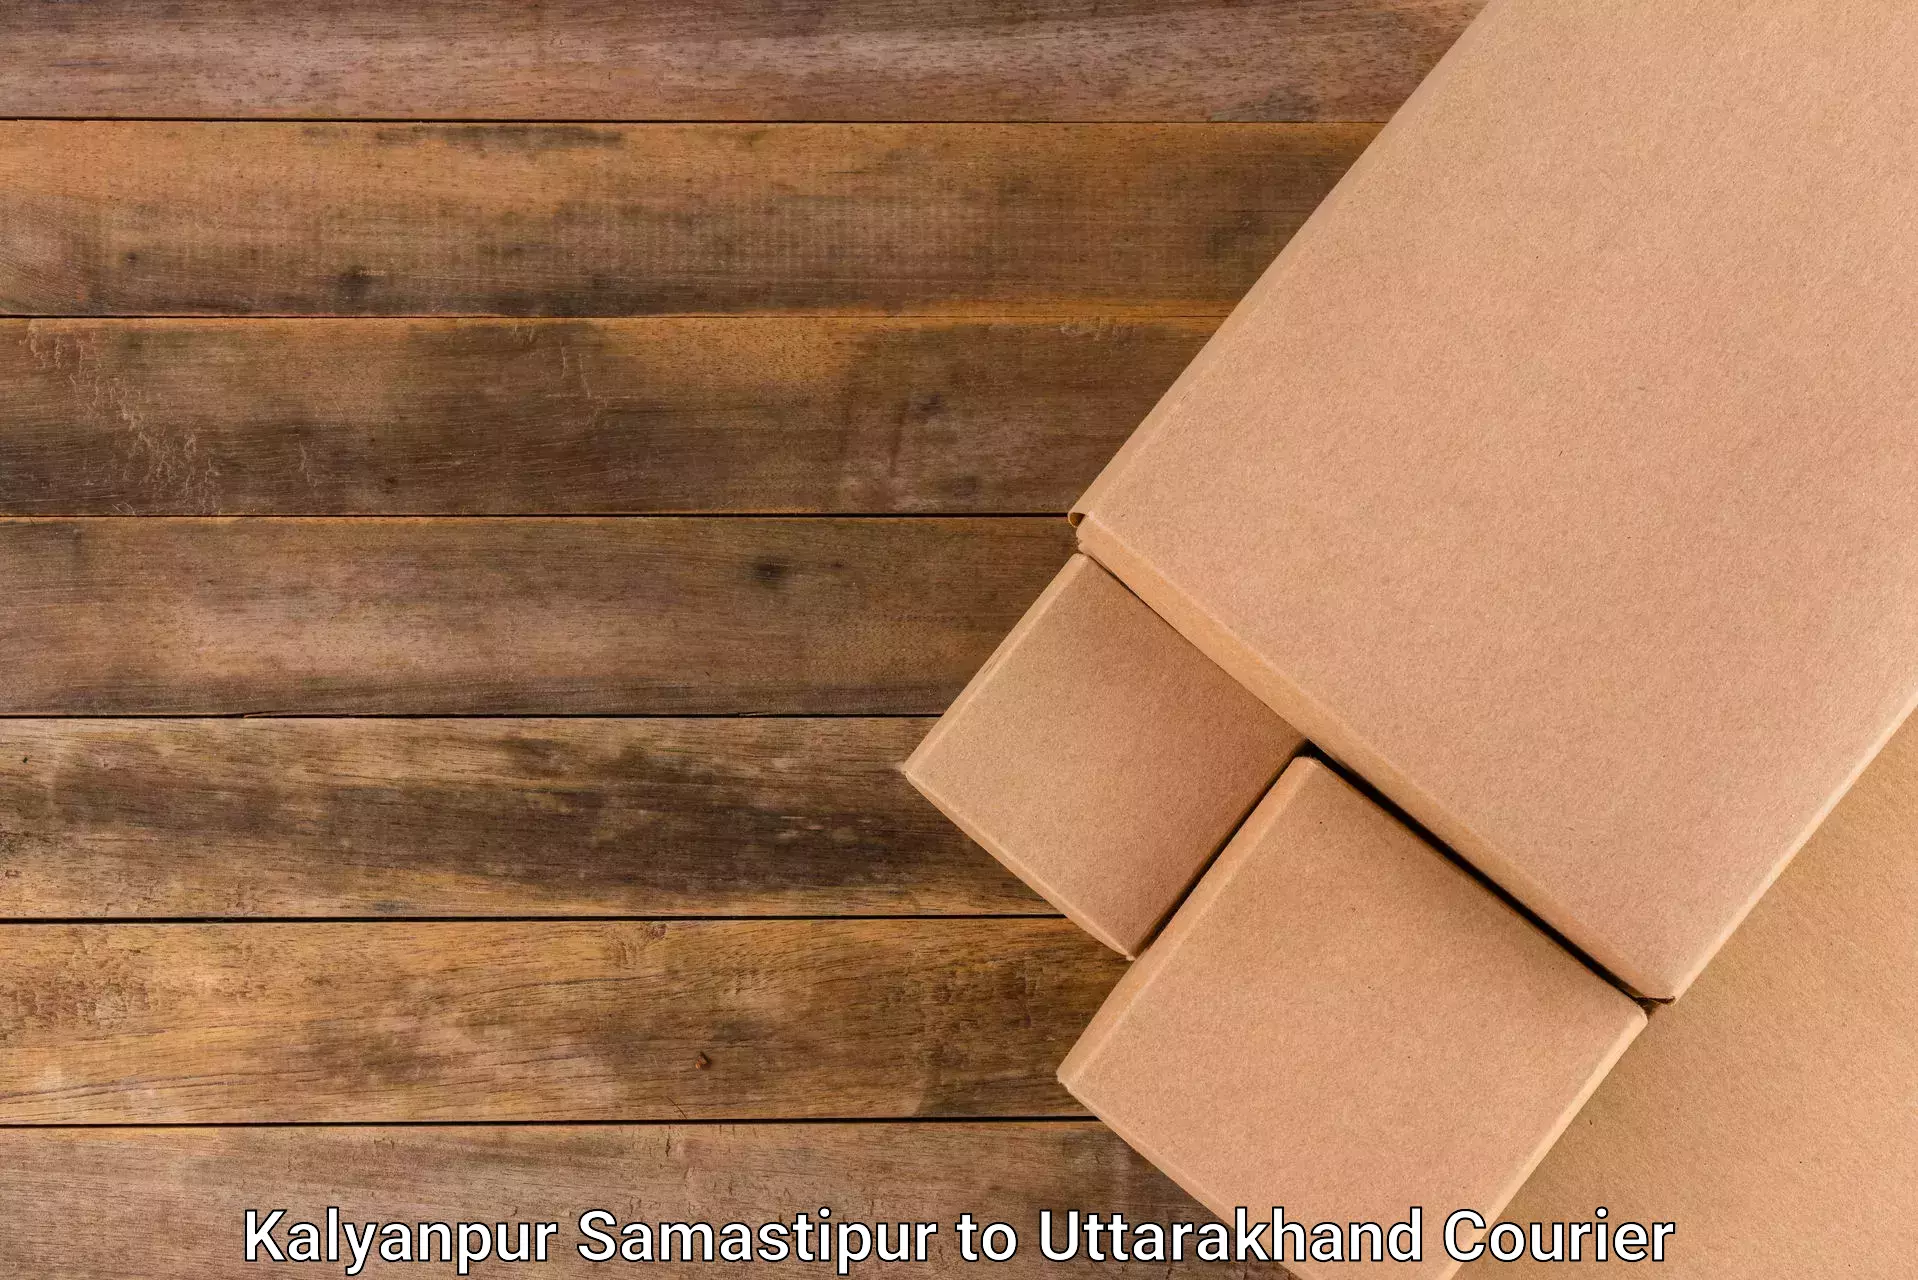 Round-the-clock parcel delivery Kalyanpur Samastipur to Dwarahat